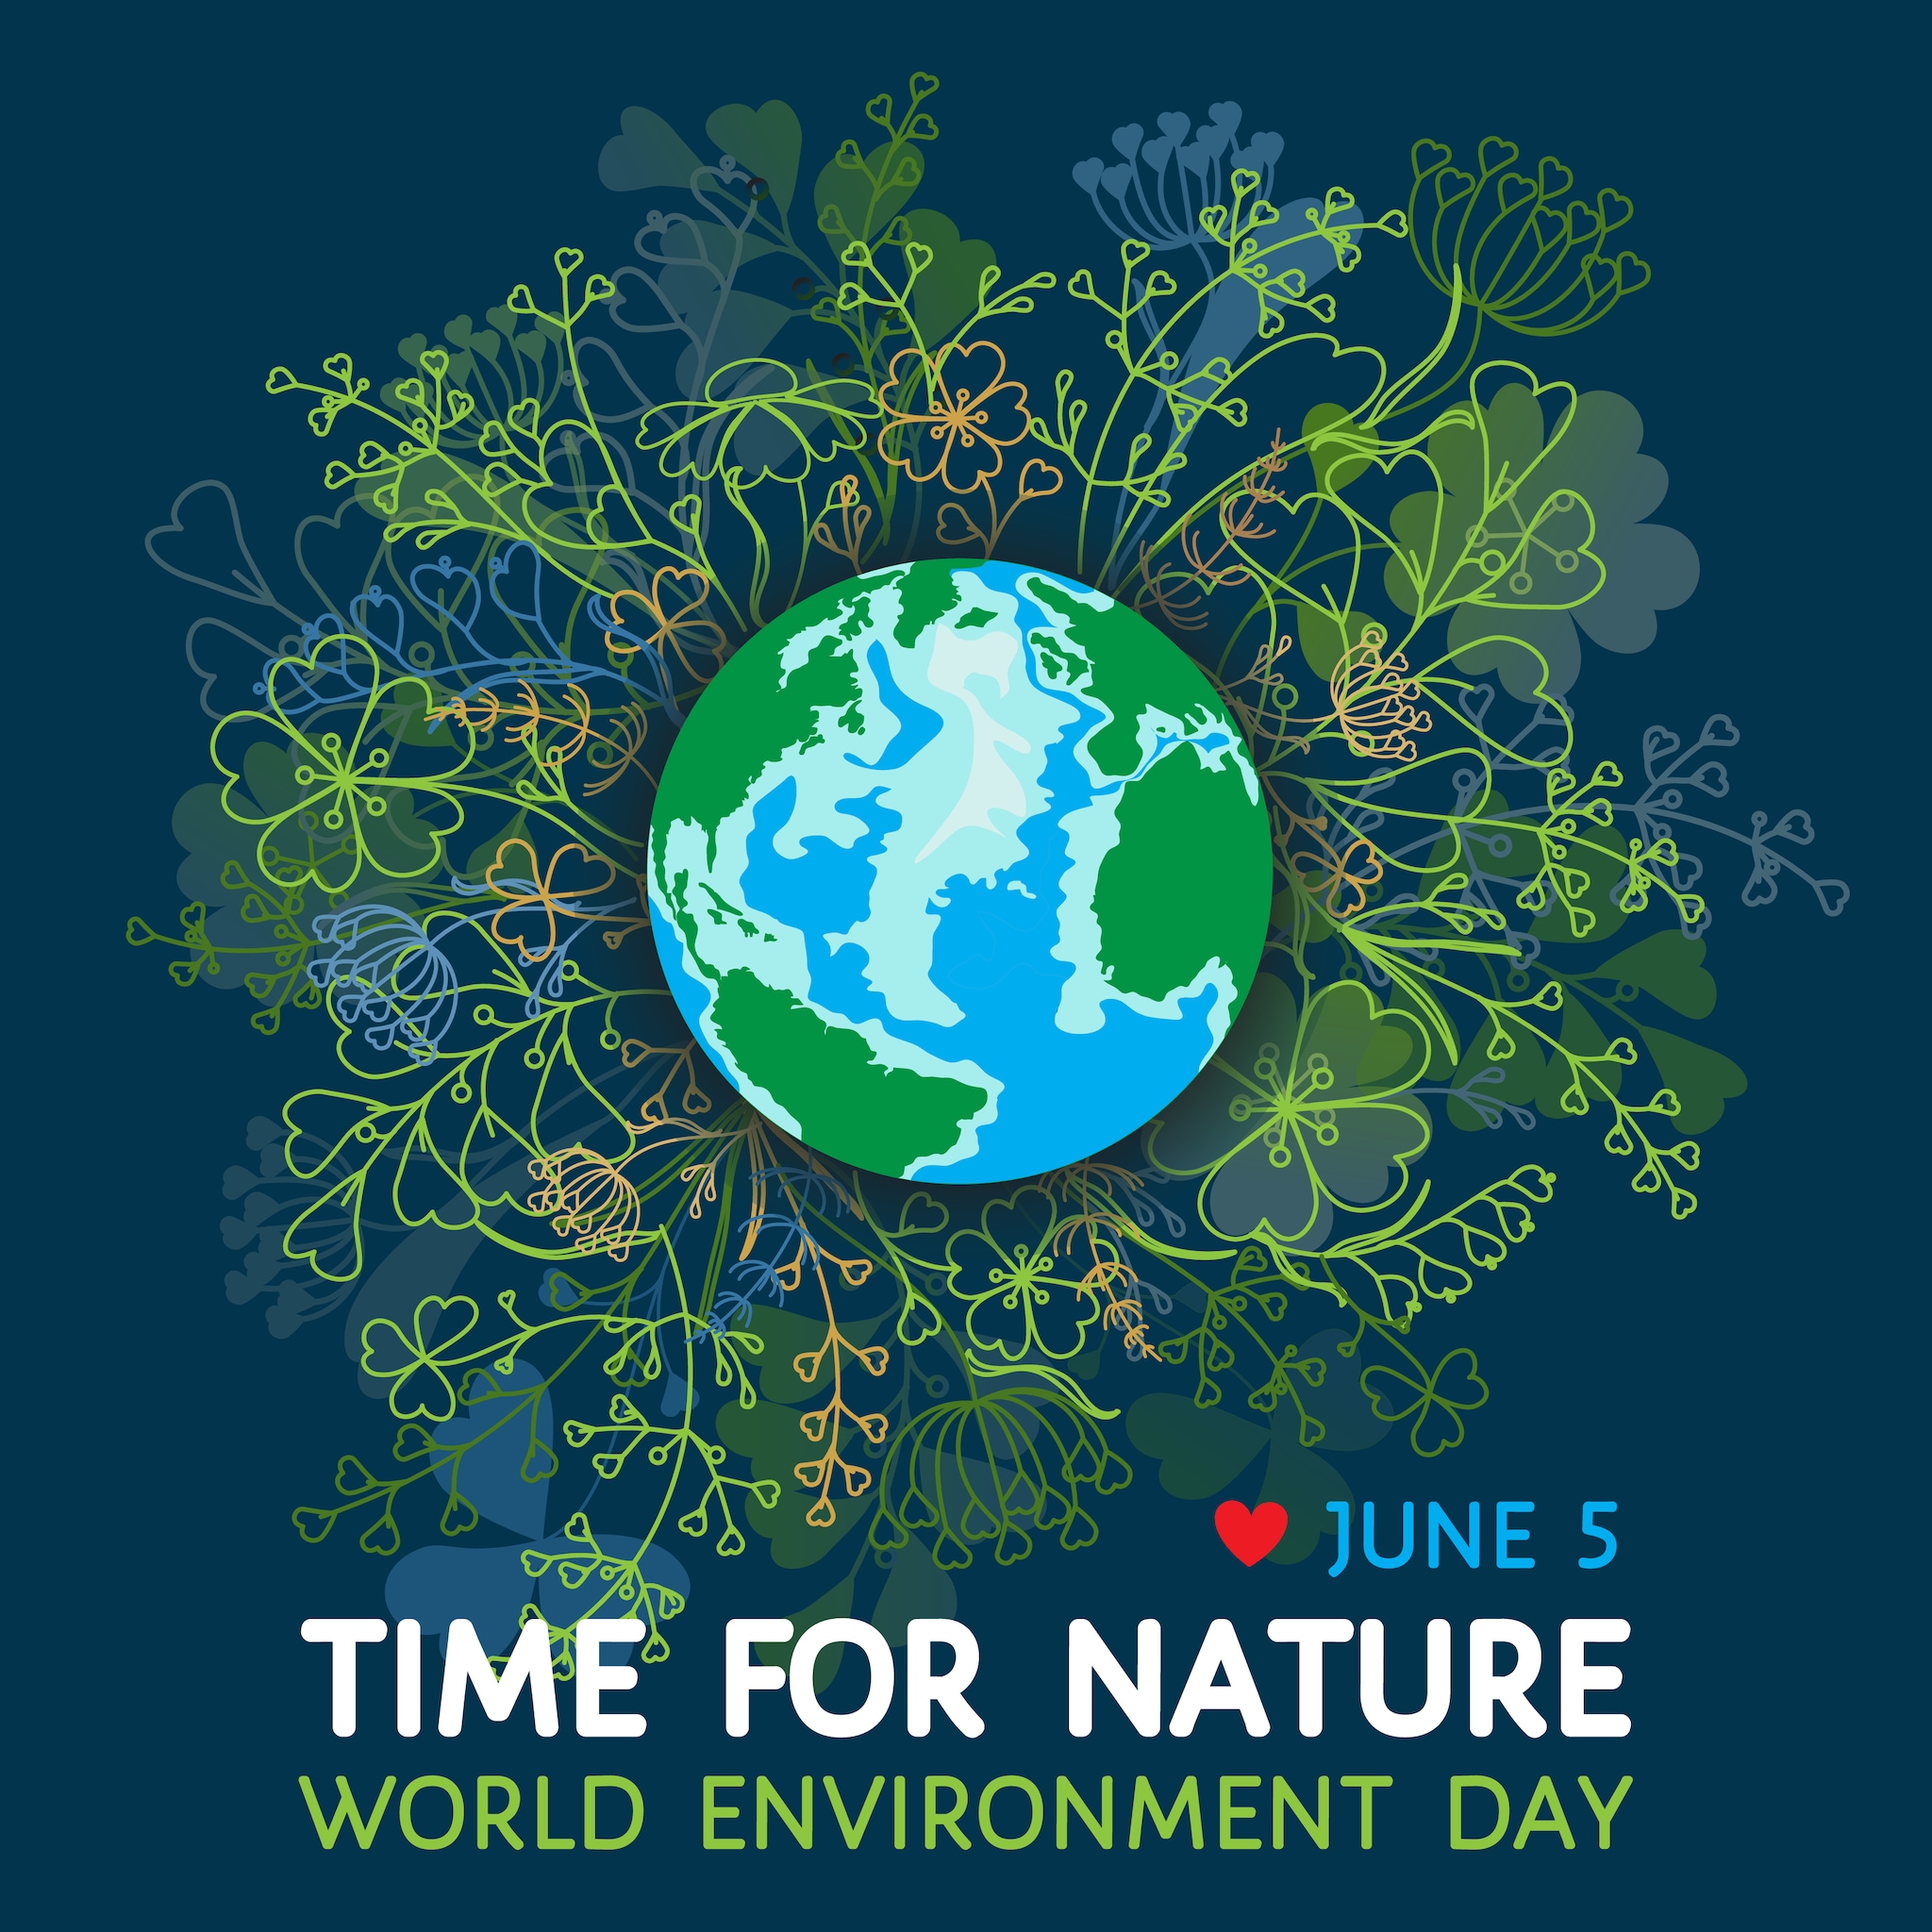 World Environment Day 2022 Wishes: Images, Wishes, Quotes, Messages and WhatsApp Wishes to share.  (Image: Shutterstock)